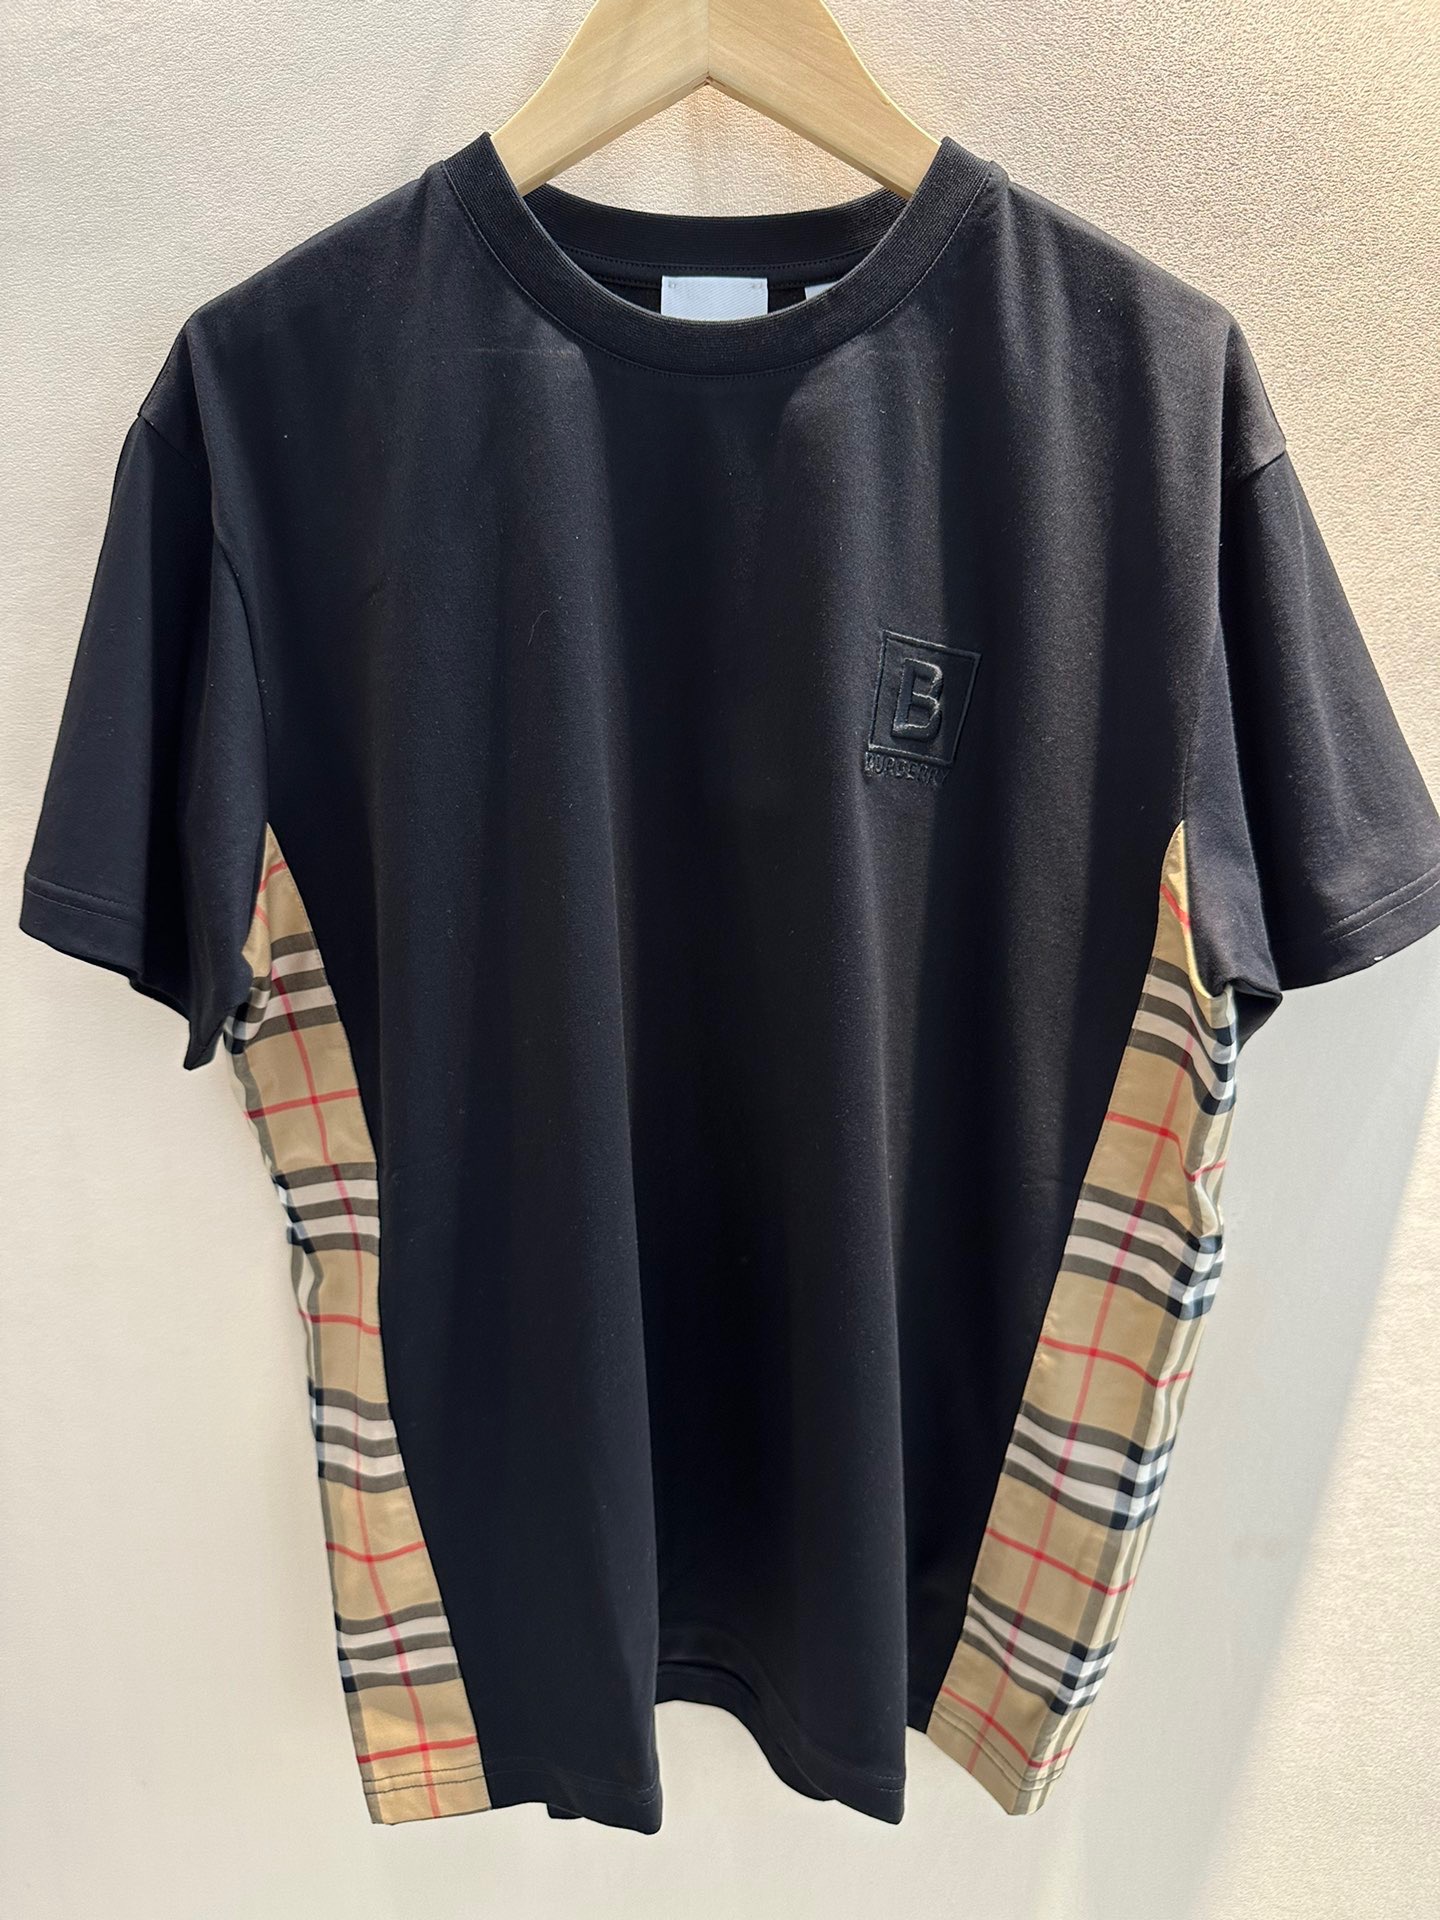 Burberry Europe Exclusive Side Check Panel Tee Black